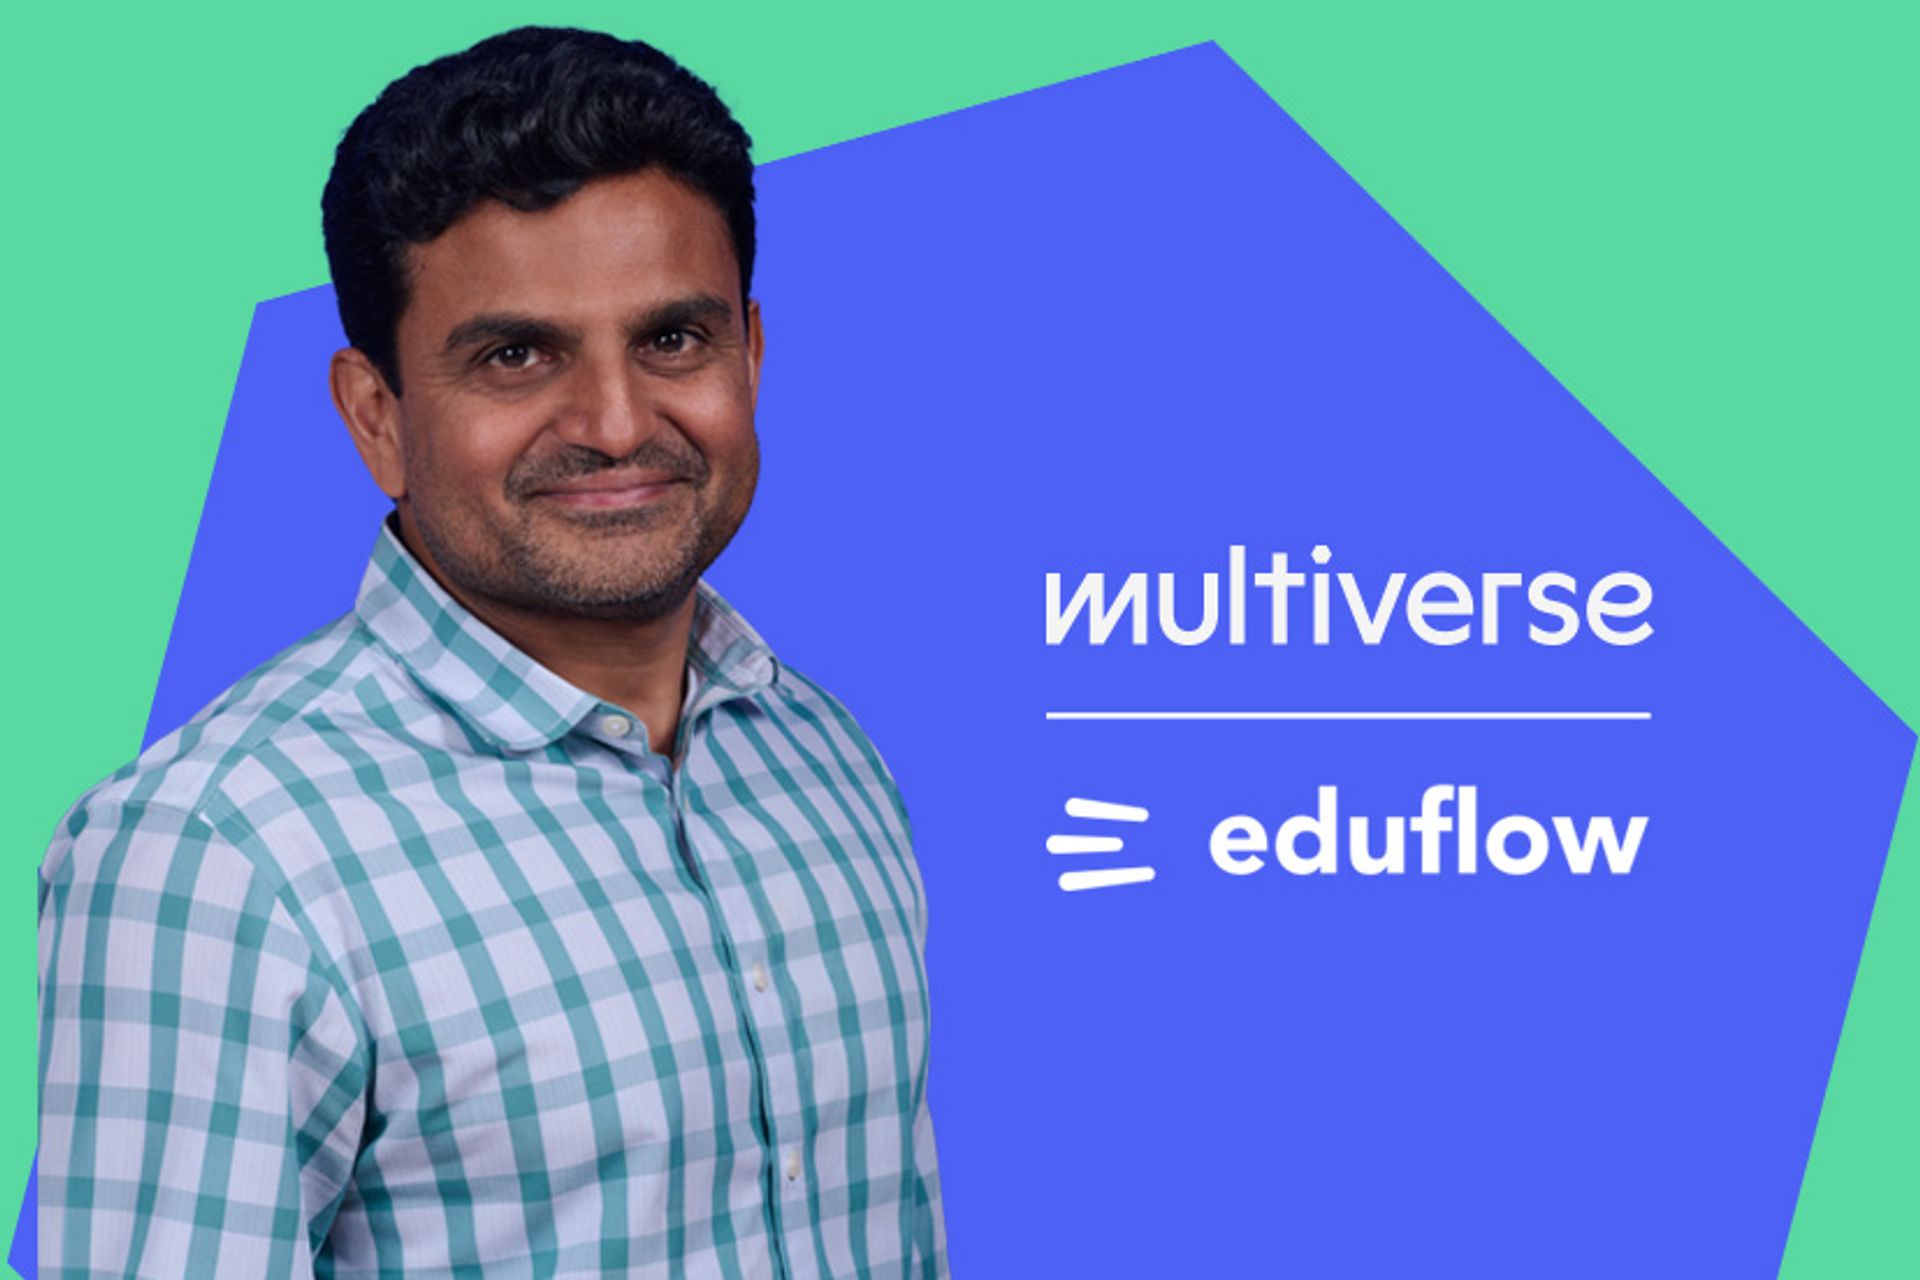 Headshot of Ujjwal, and the Multiverse and Eduflow logos